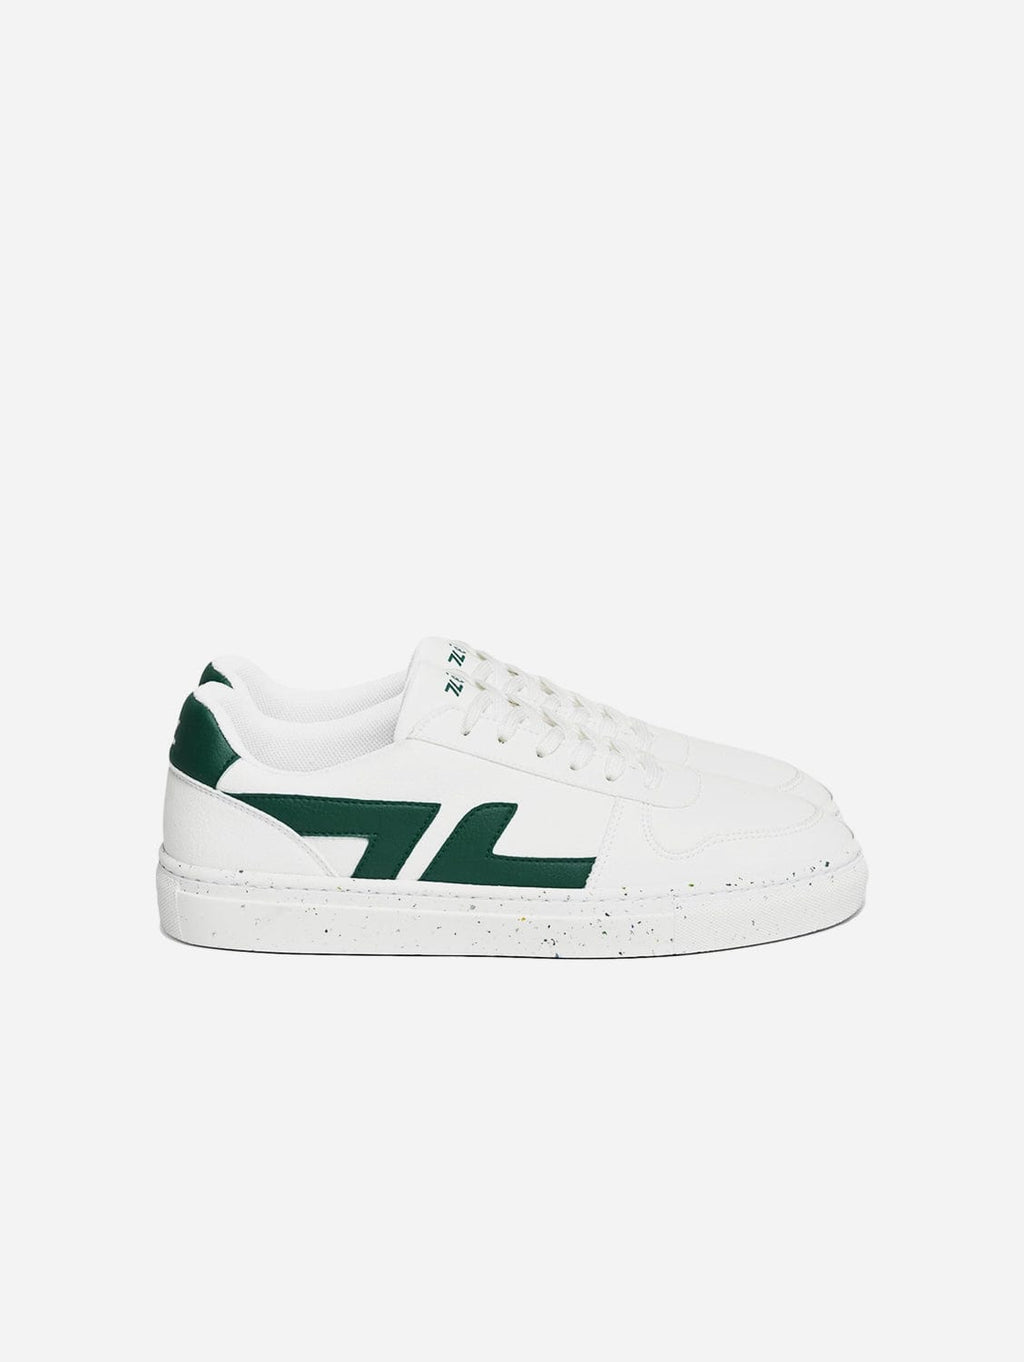 Alpha Grape Leather Vegan Trainers | Green by Zeta Shoes - Immaculate Vegan